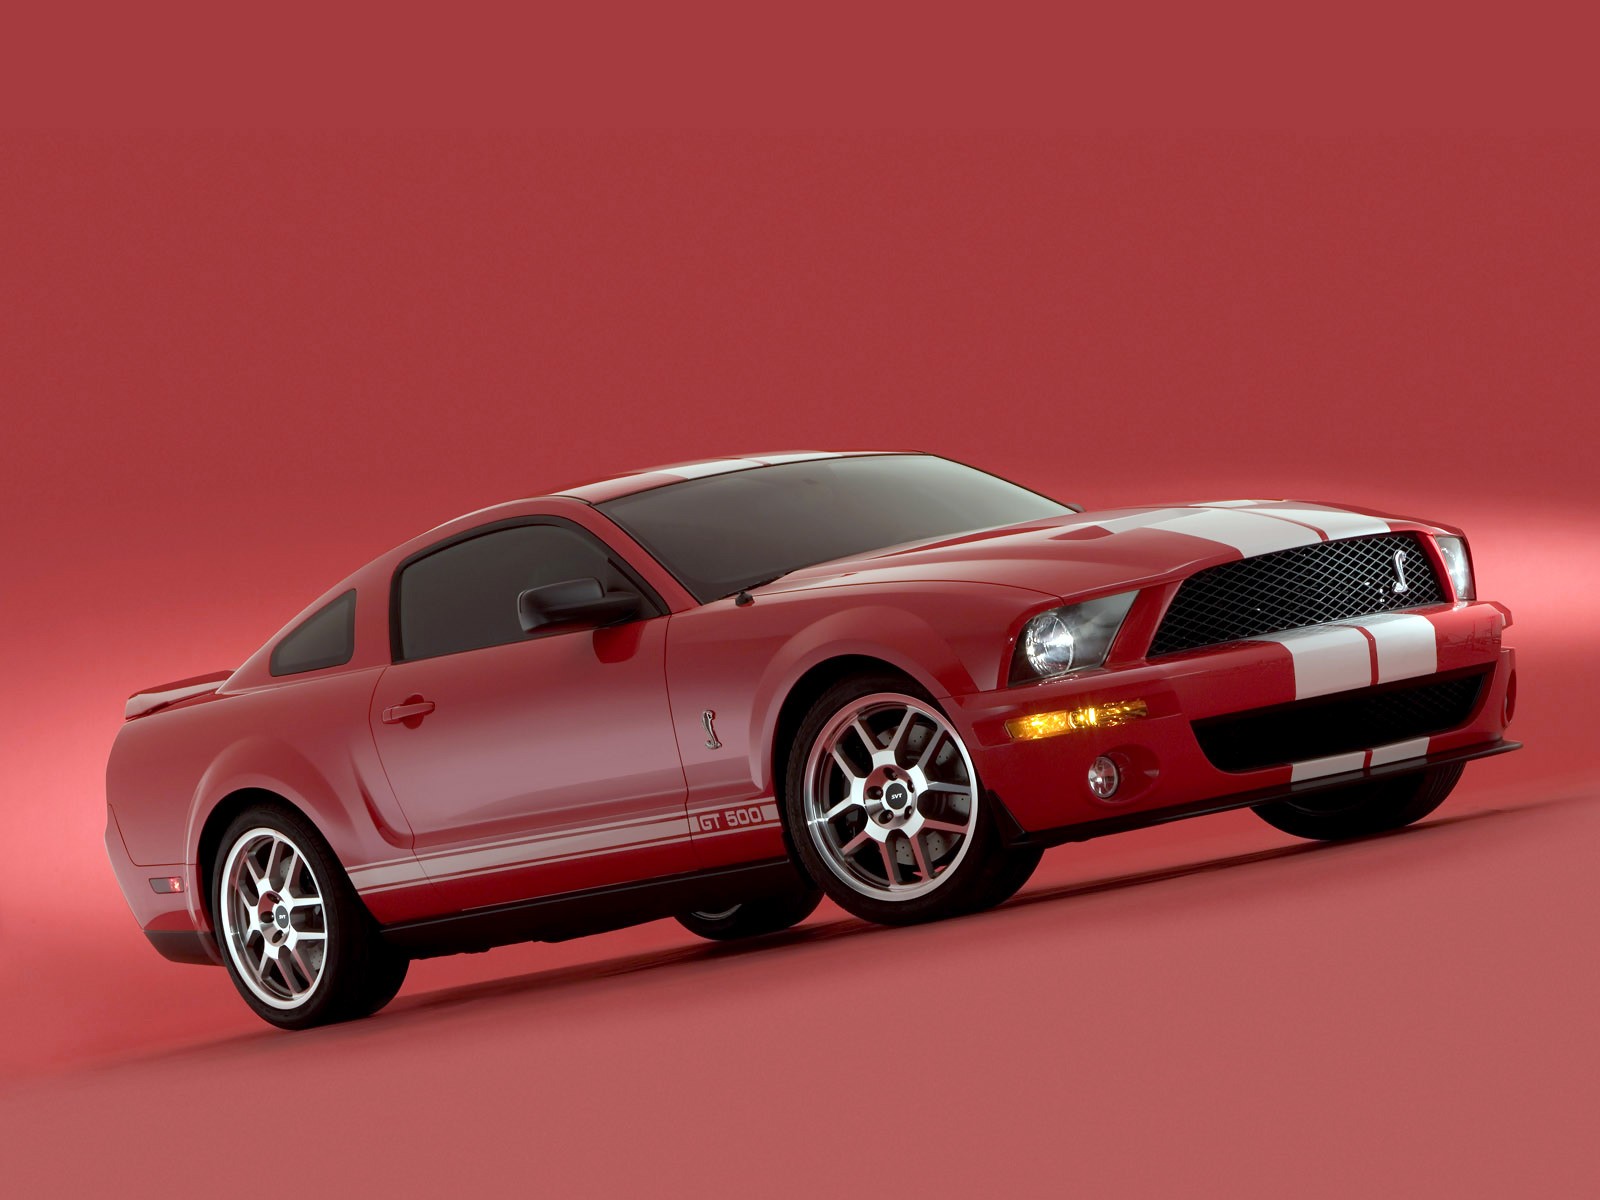 General 1600x1200 car red background red cars vehicle Ford Ford Mustang muscle cars Shelby American cars racing stripes